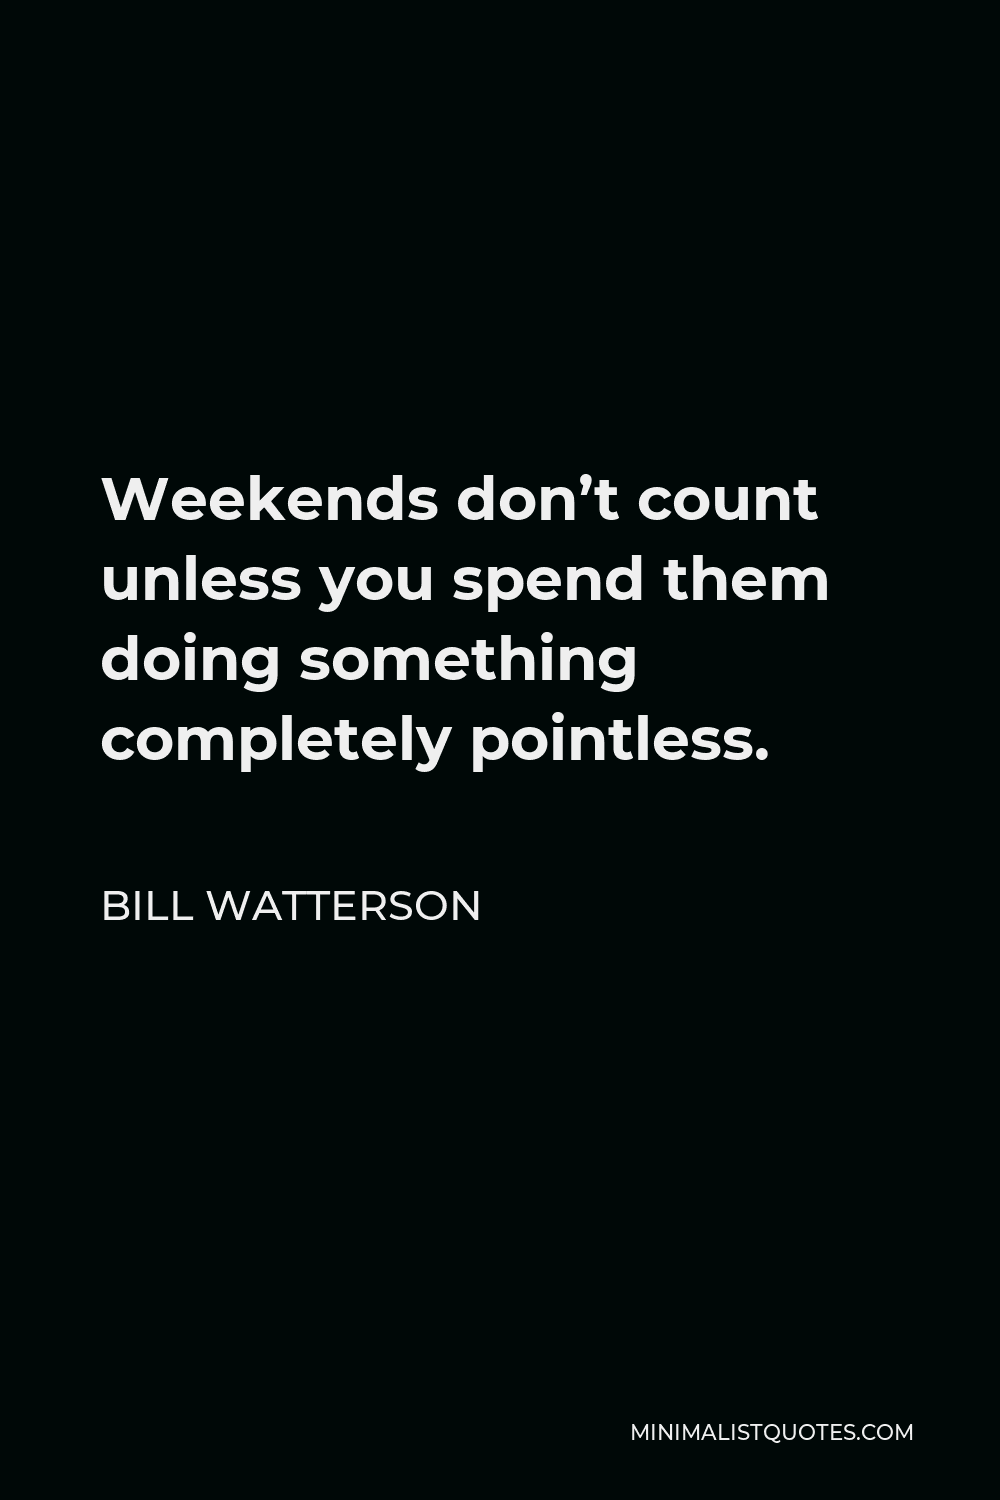 Bill Watterson Quote - Weekends don’t count unless you spend them doing something completely pointless.